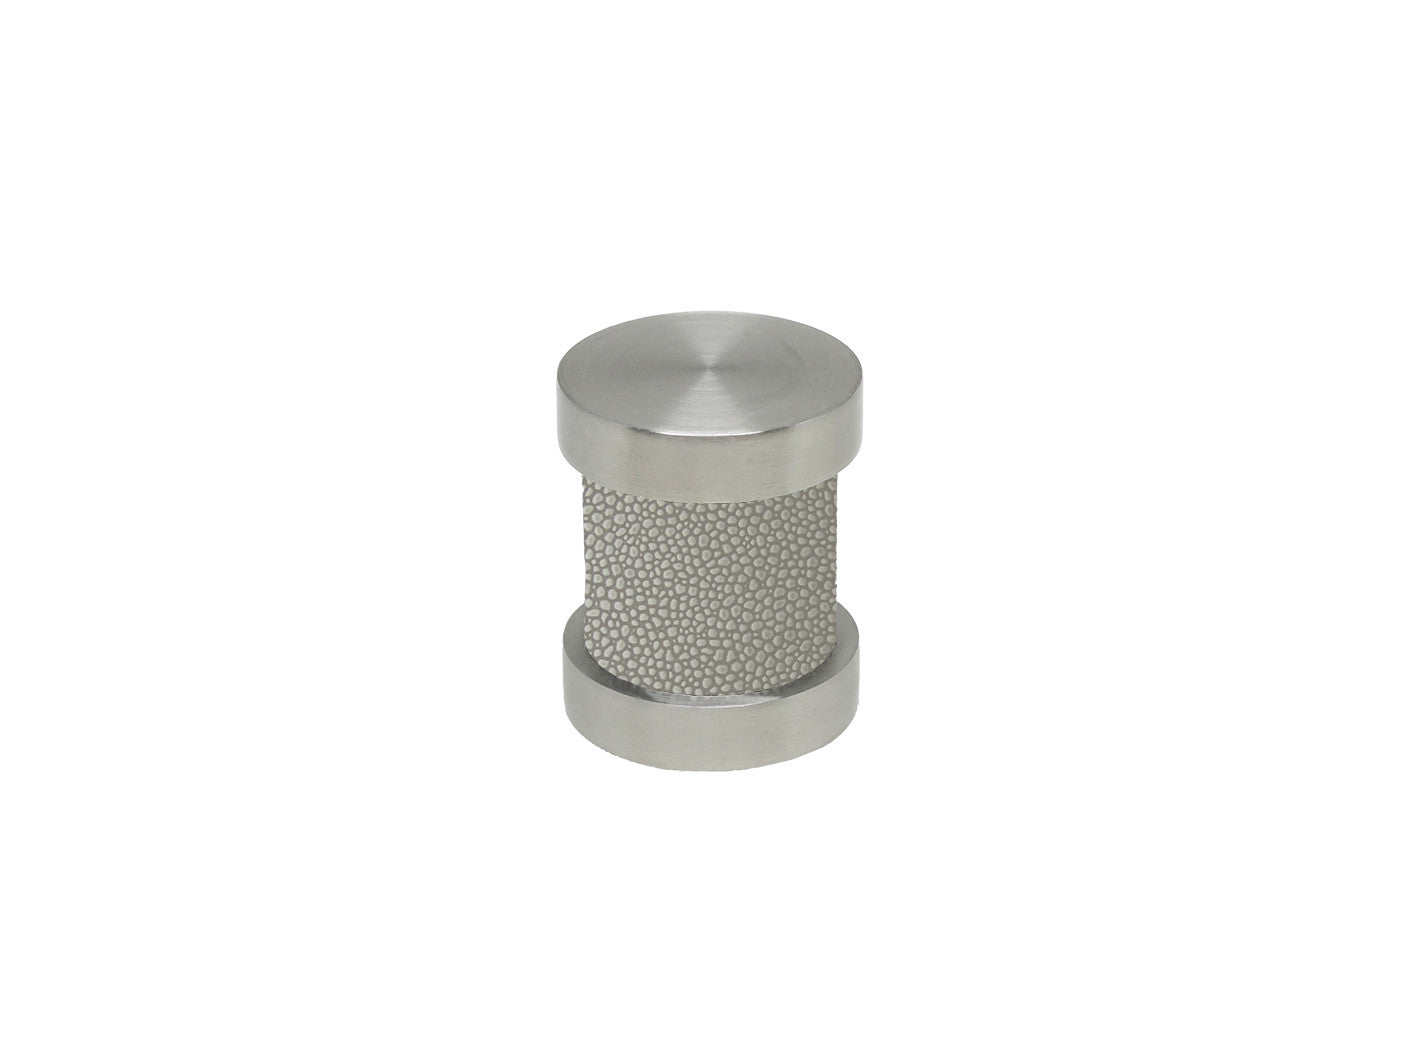 Pebble grey groove finial | Walcot House 30mm stainless steel collection